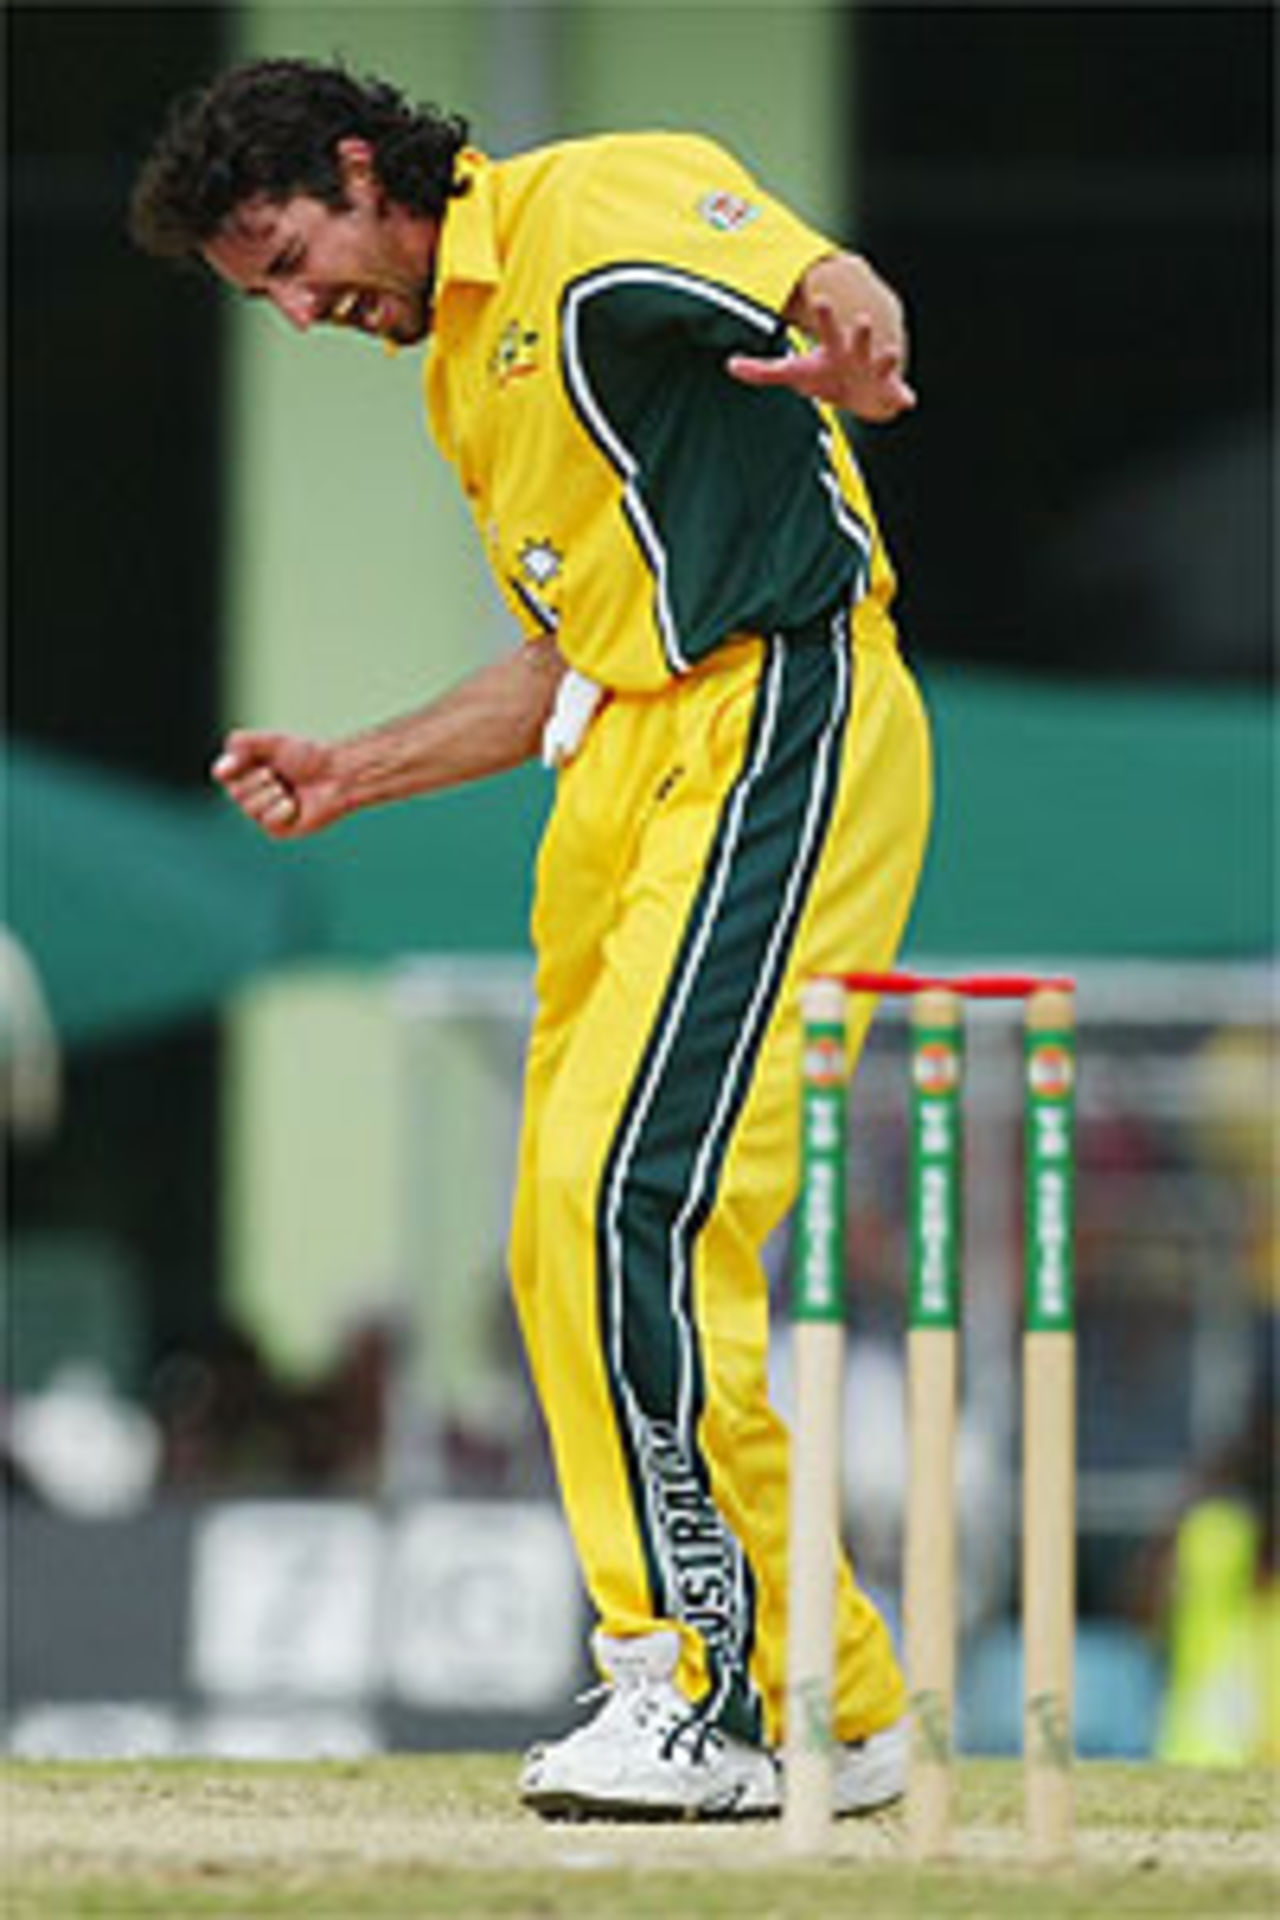 CAIRNS- AUGUST 2: Jason Gillespie of Australia celebrates the wicket of Khaled Mashud of Bangladesh during the 1st One Day International between Australia and Bangladesh played at Bundaberg Rum Stadium on August 2, 2003, Cairns, Australia.